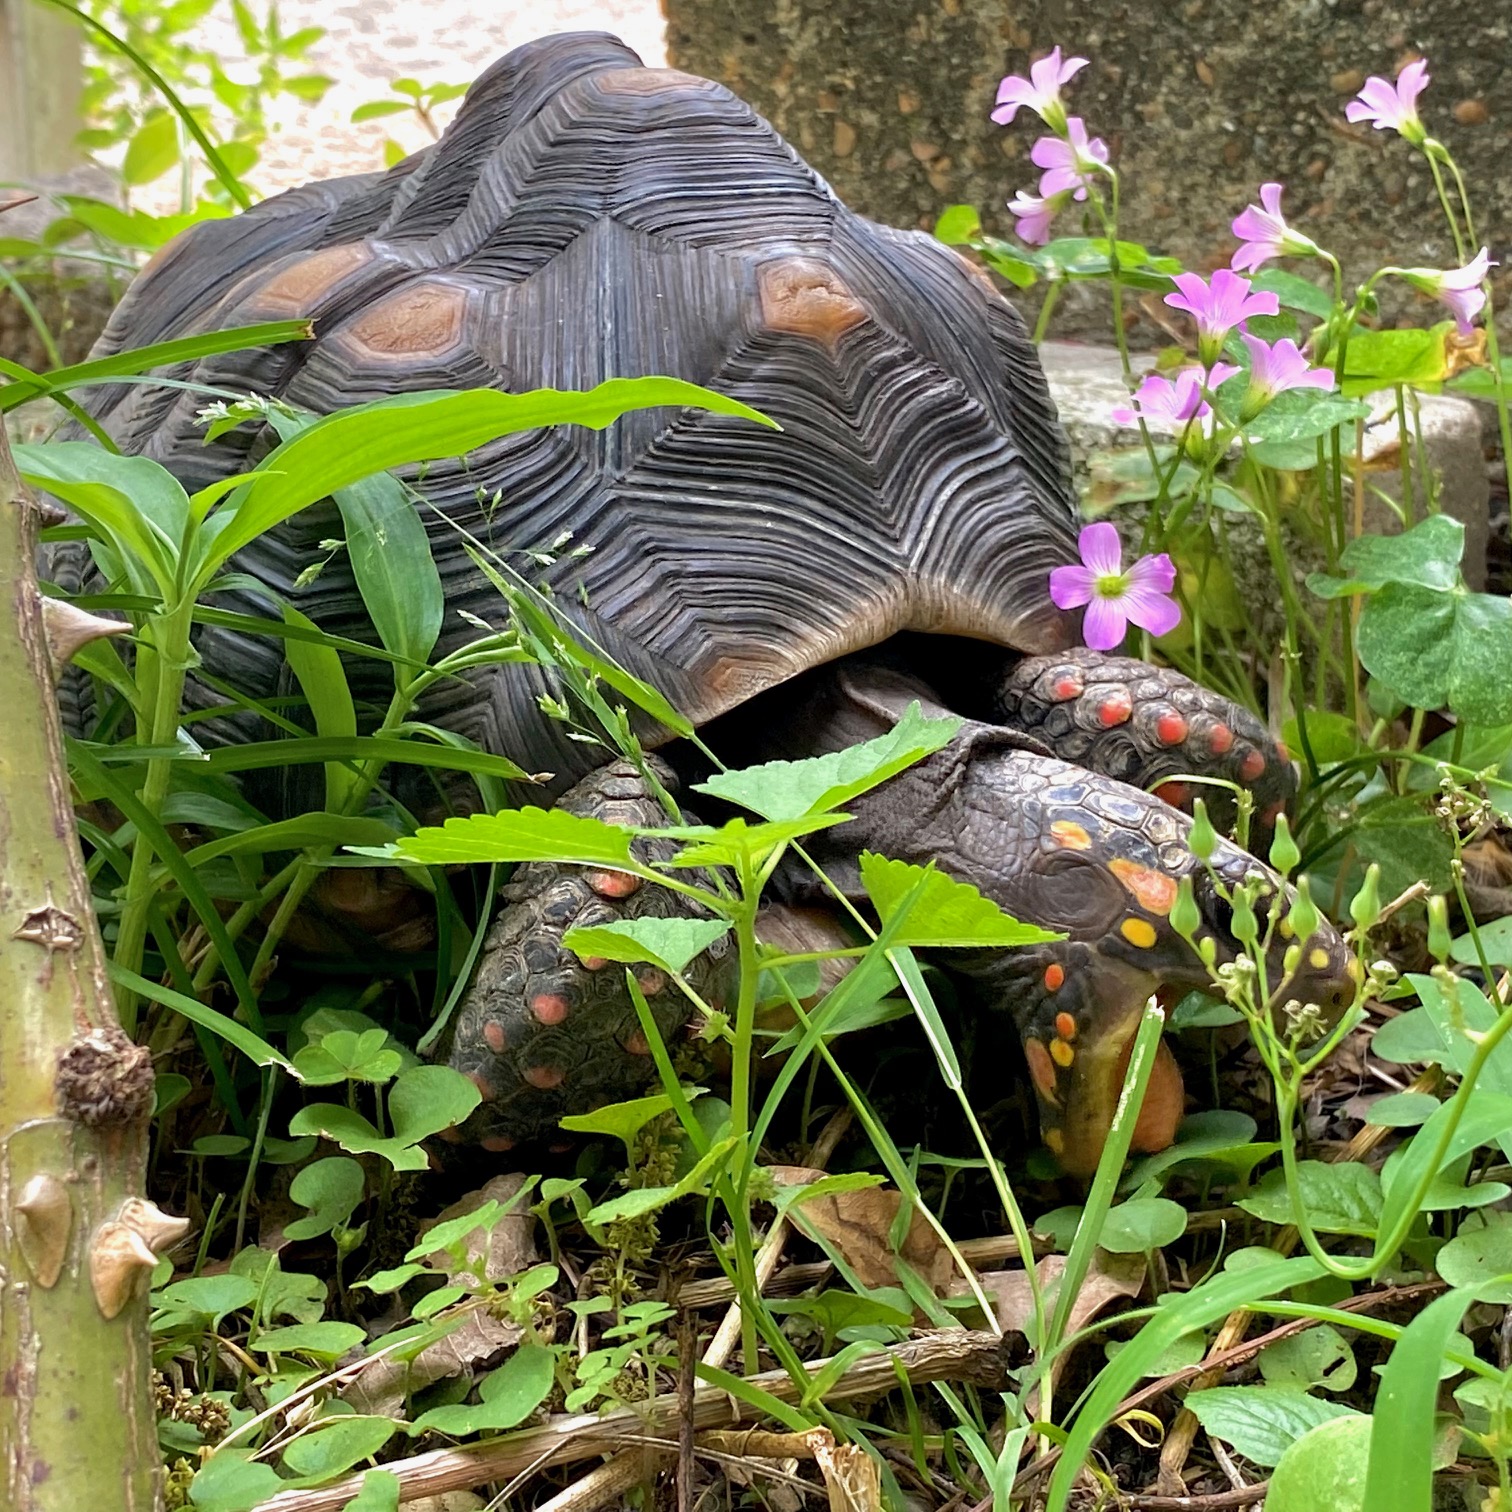 redfoot tortoise mowing the lawn